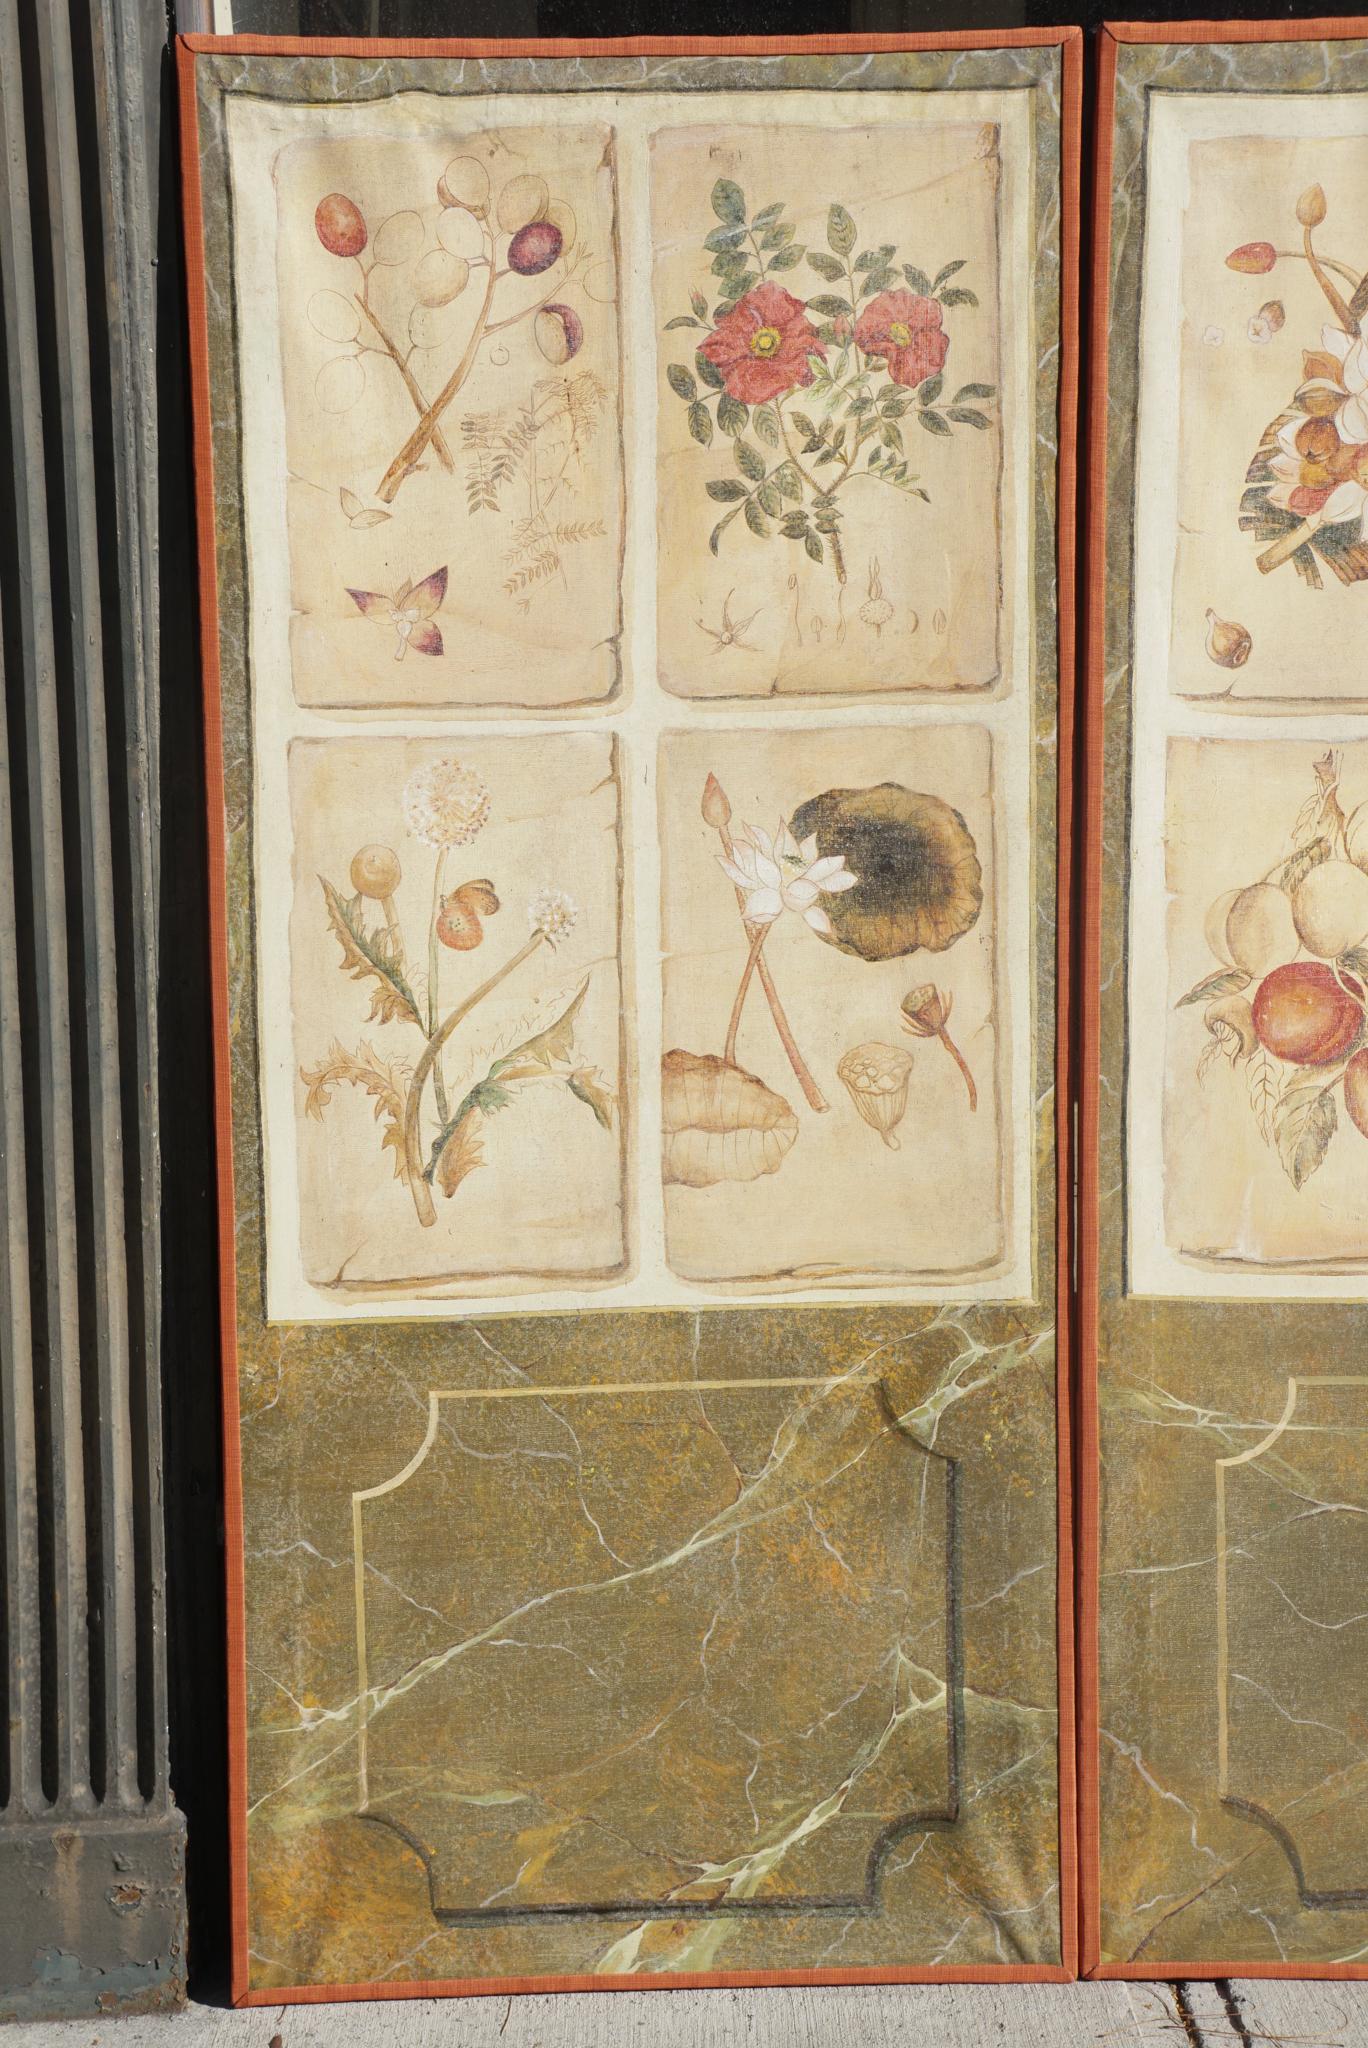 19th Century Pair of Trompe l'oeil Painted Panels from the Estate of Bunny Mellon